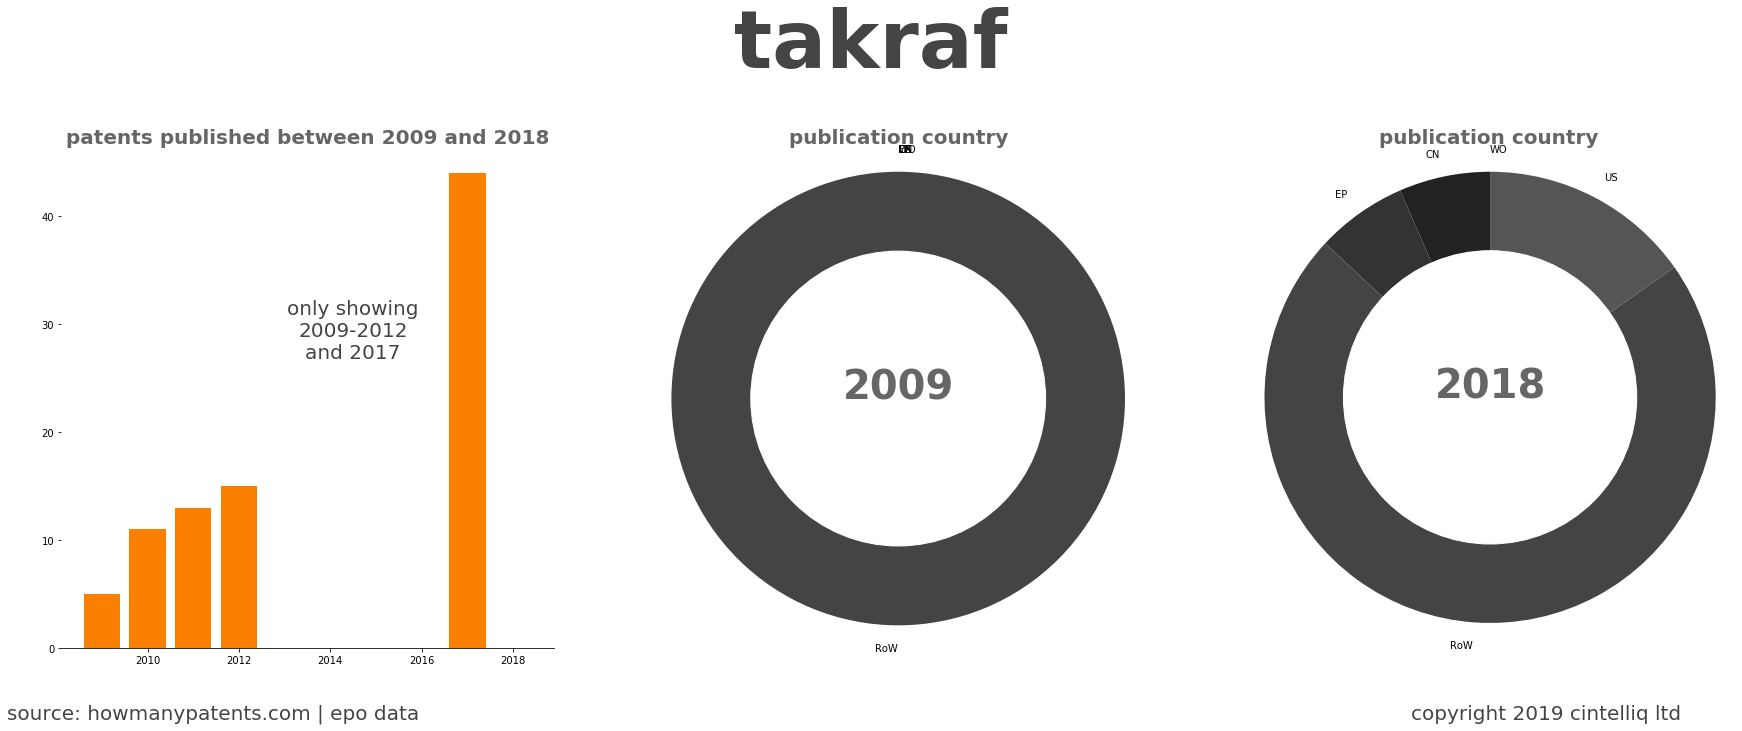 summary of patents for Takraf